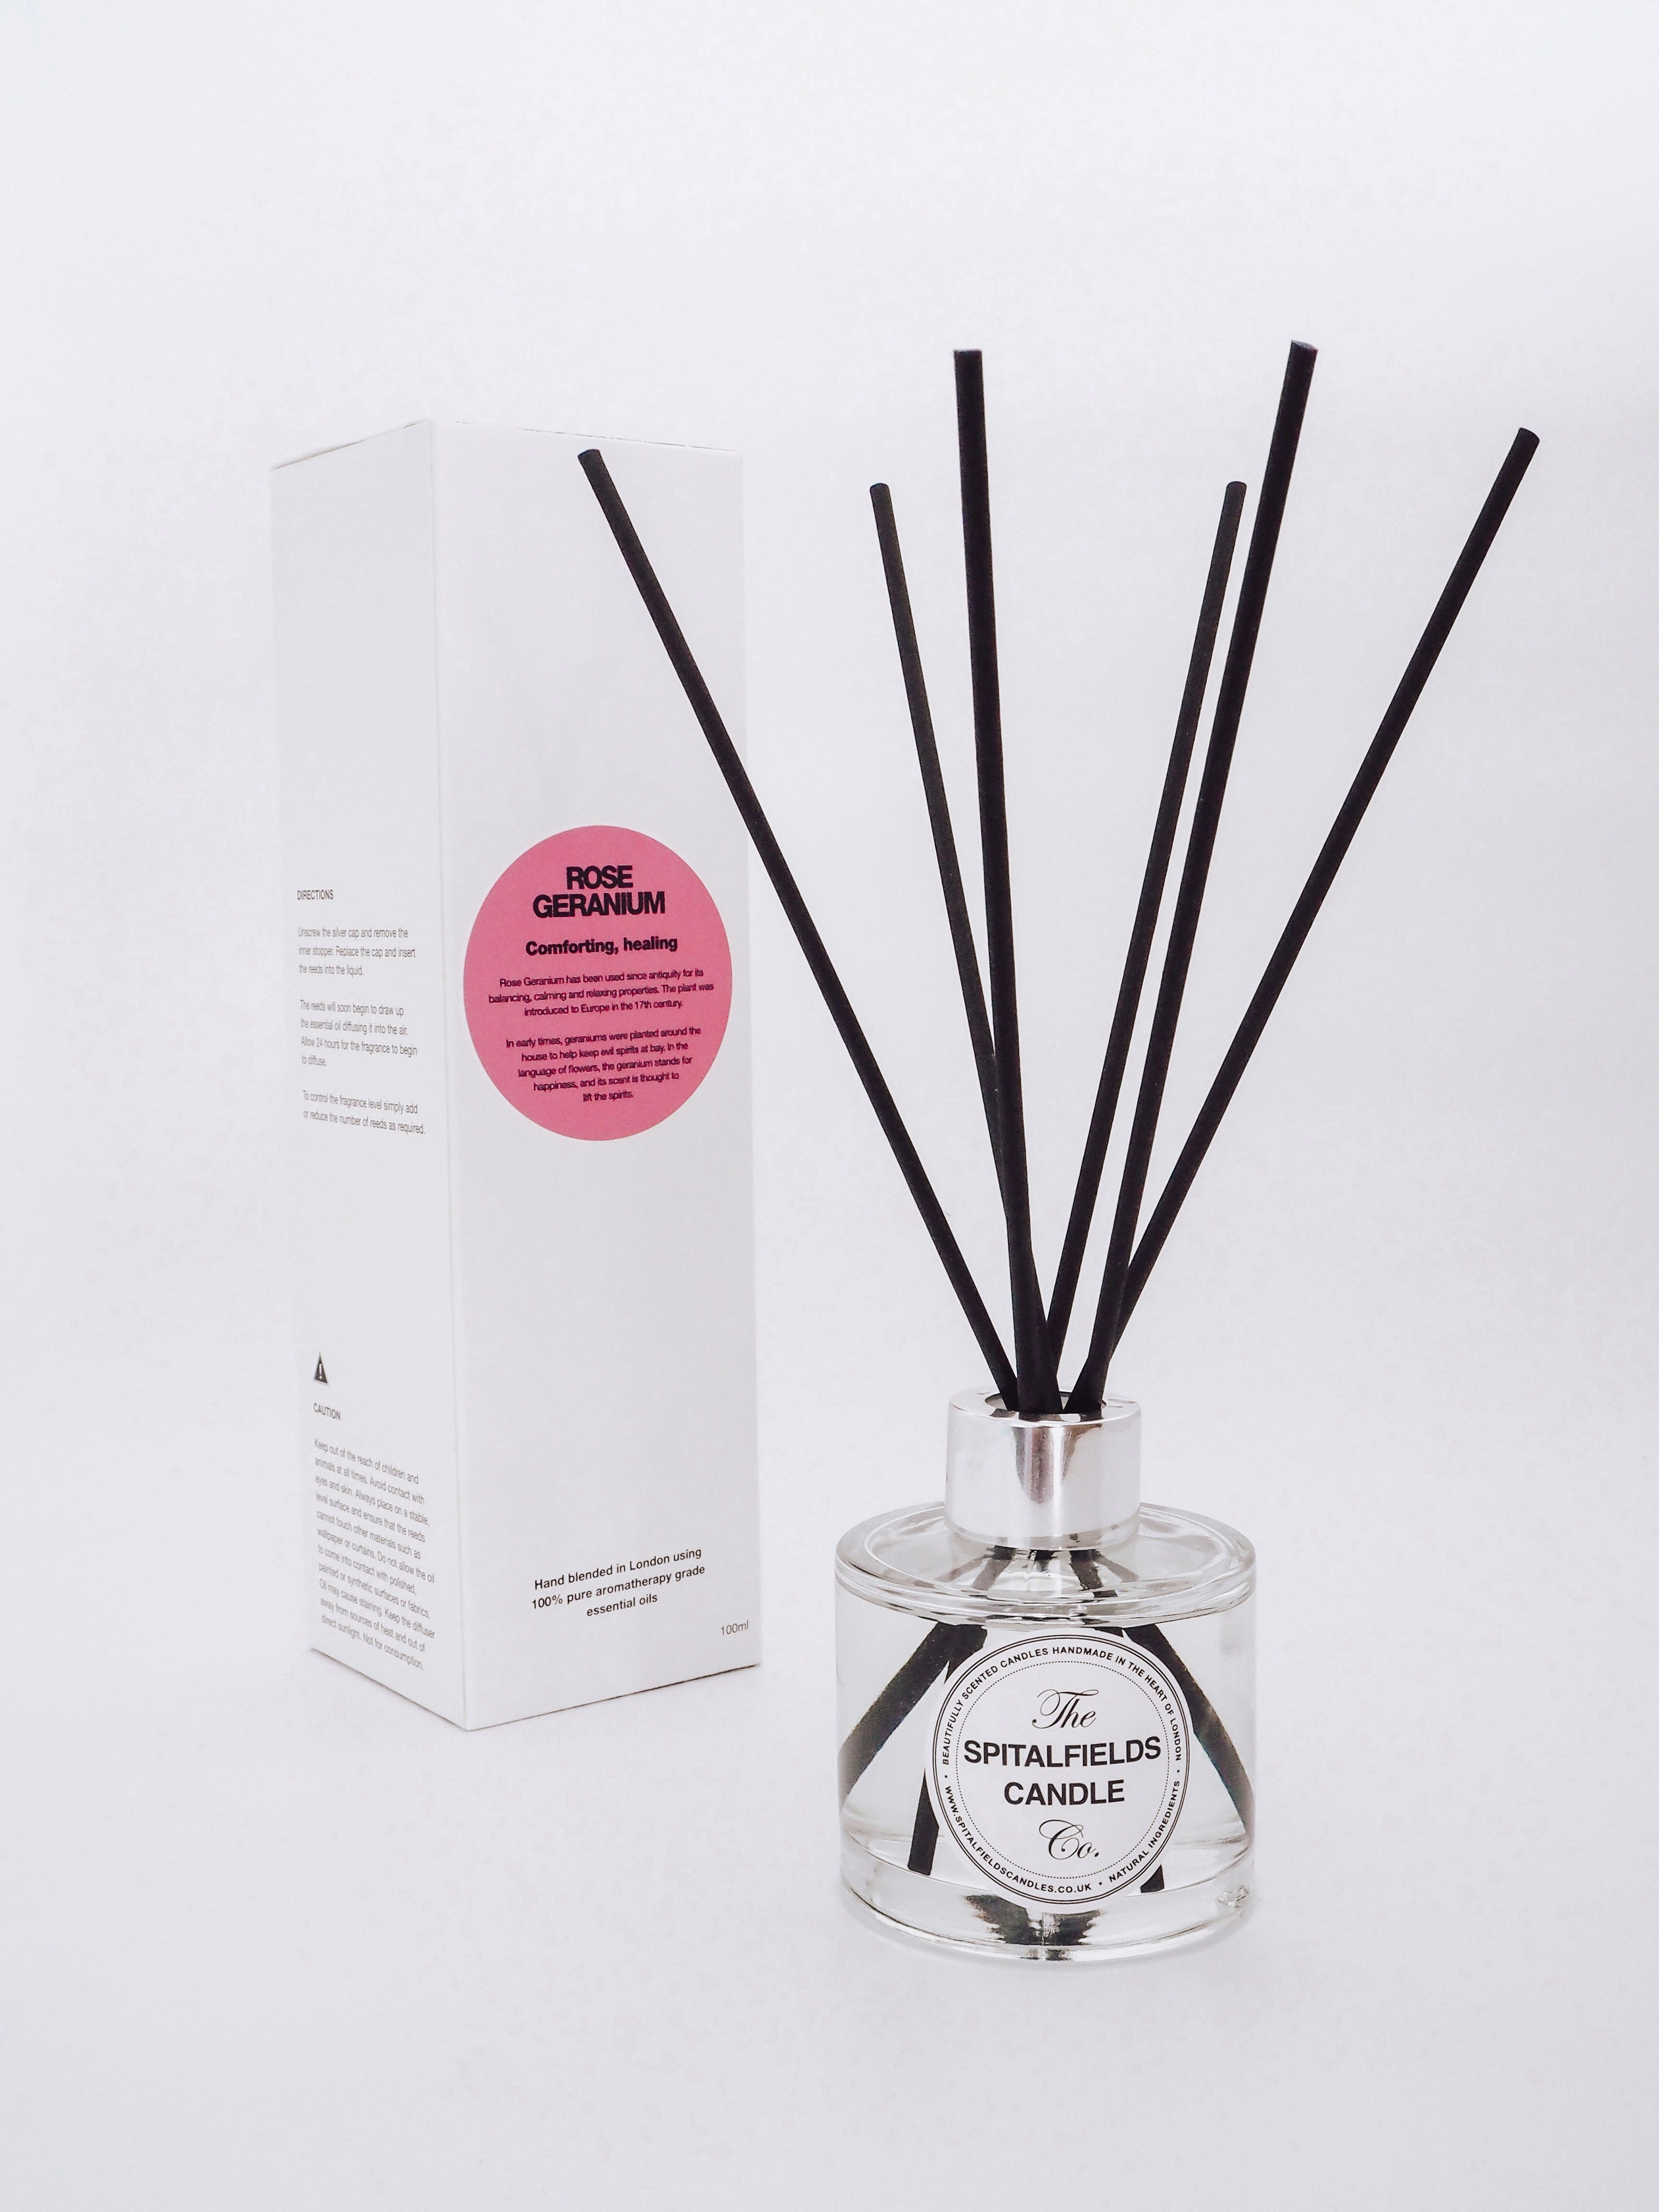 100% Natural Luxury Scented Reed Diffusers